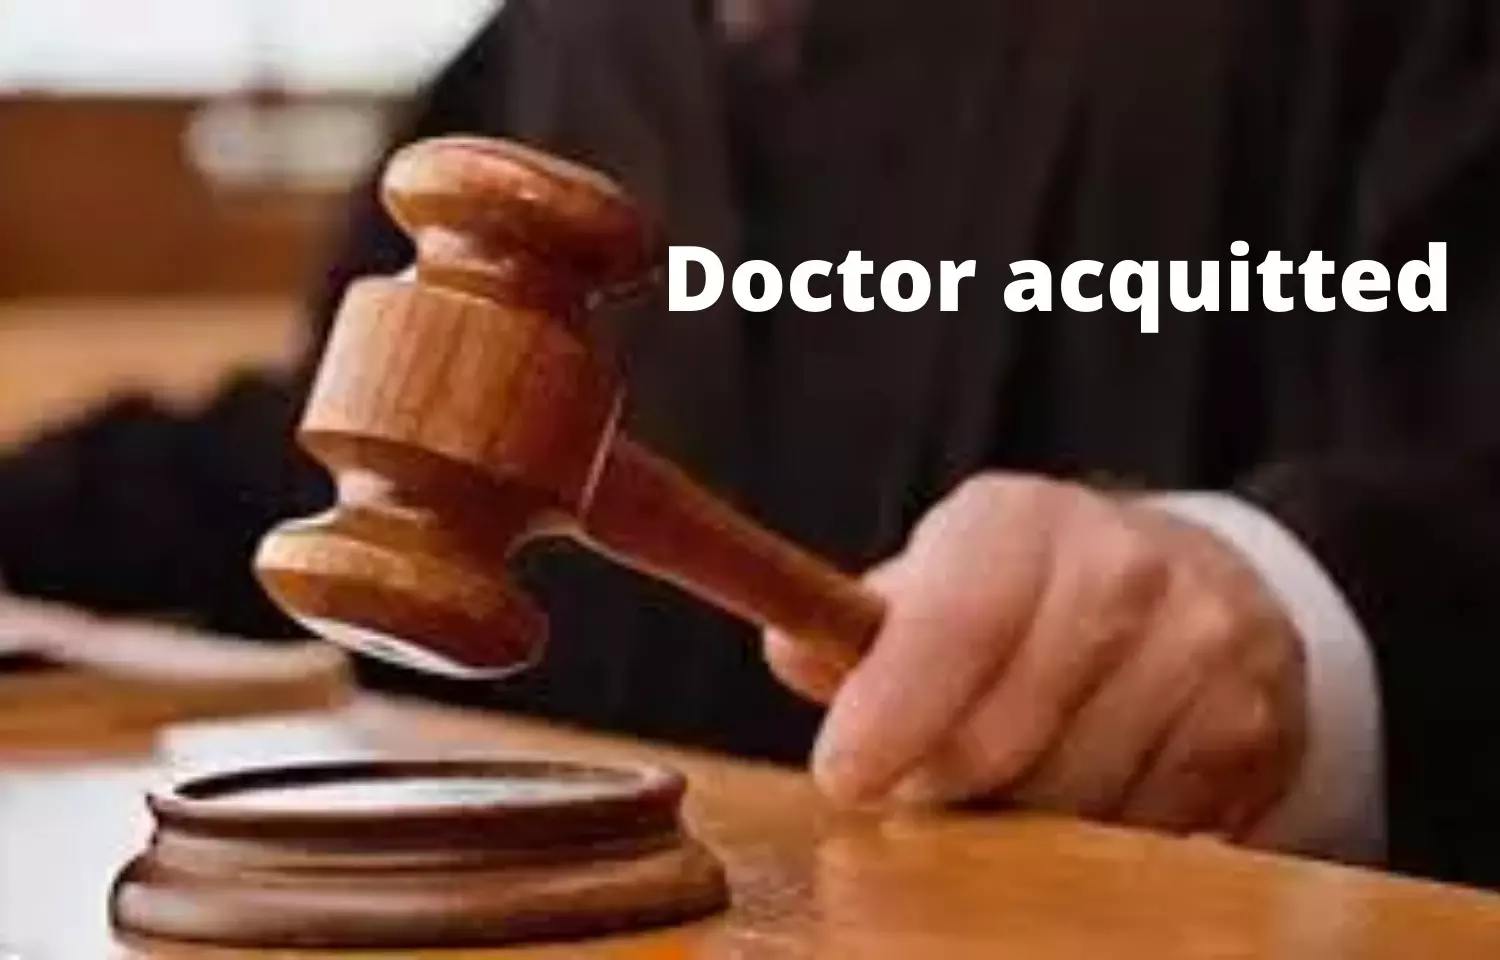 33-year-old doctor accused of assaulting a male patient acquitted on evidence of  PPE kit